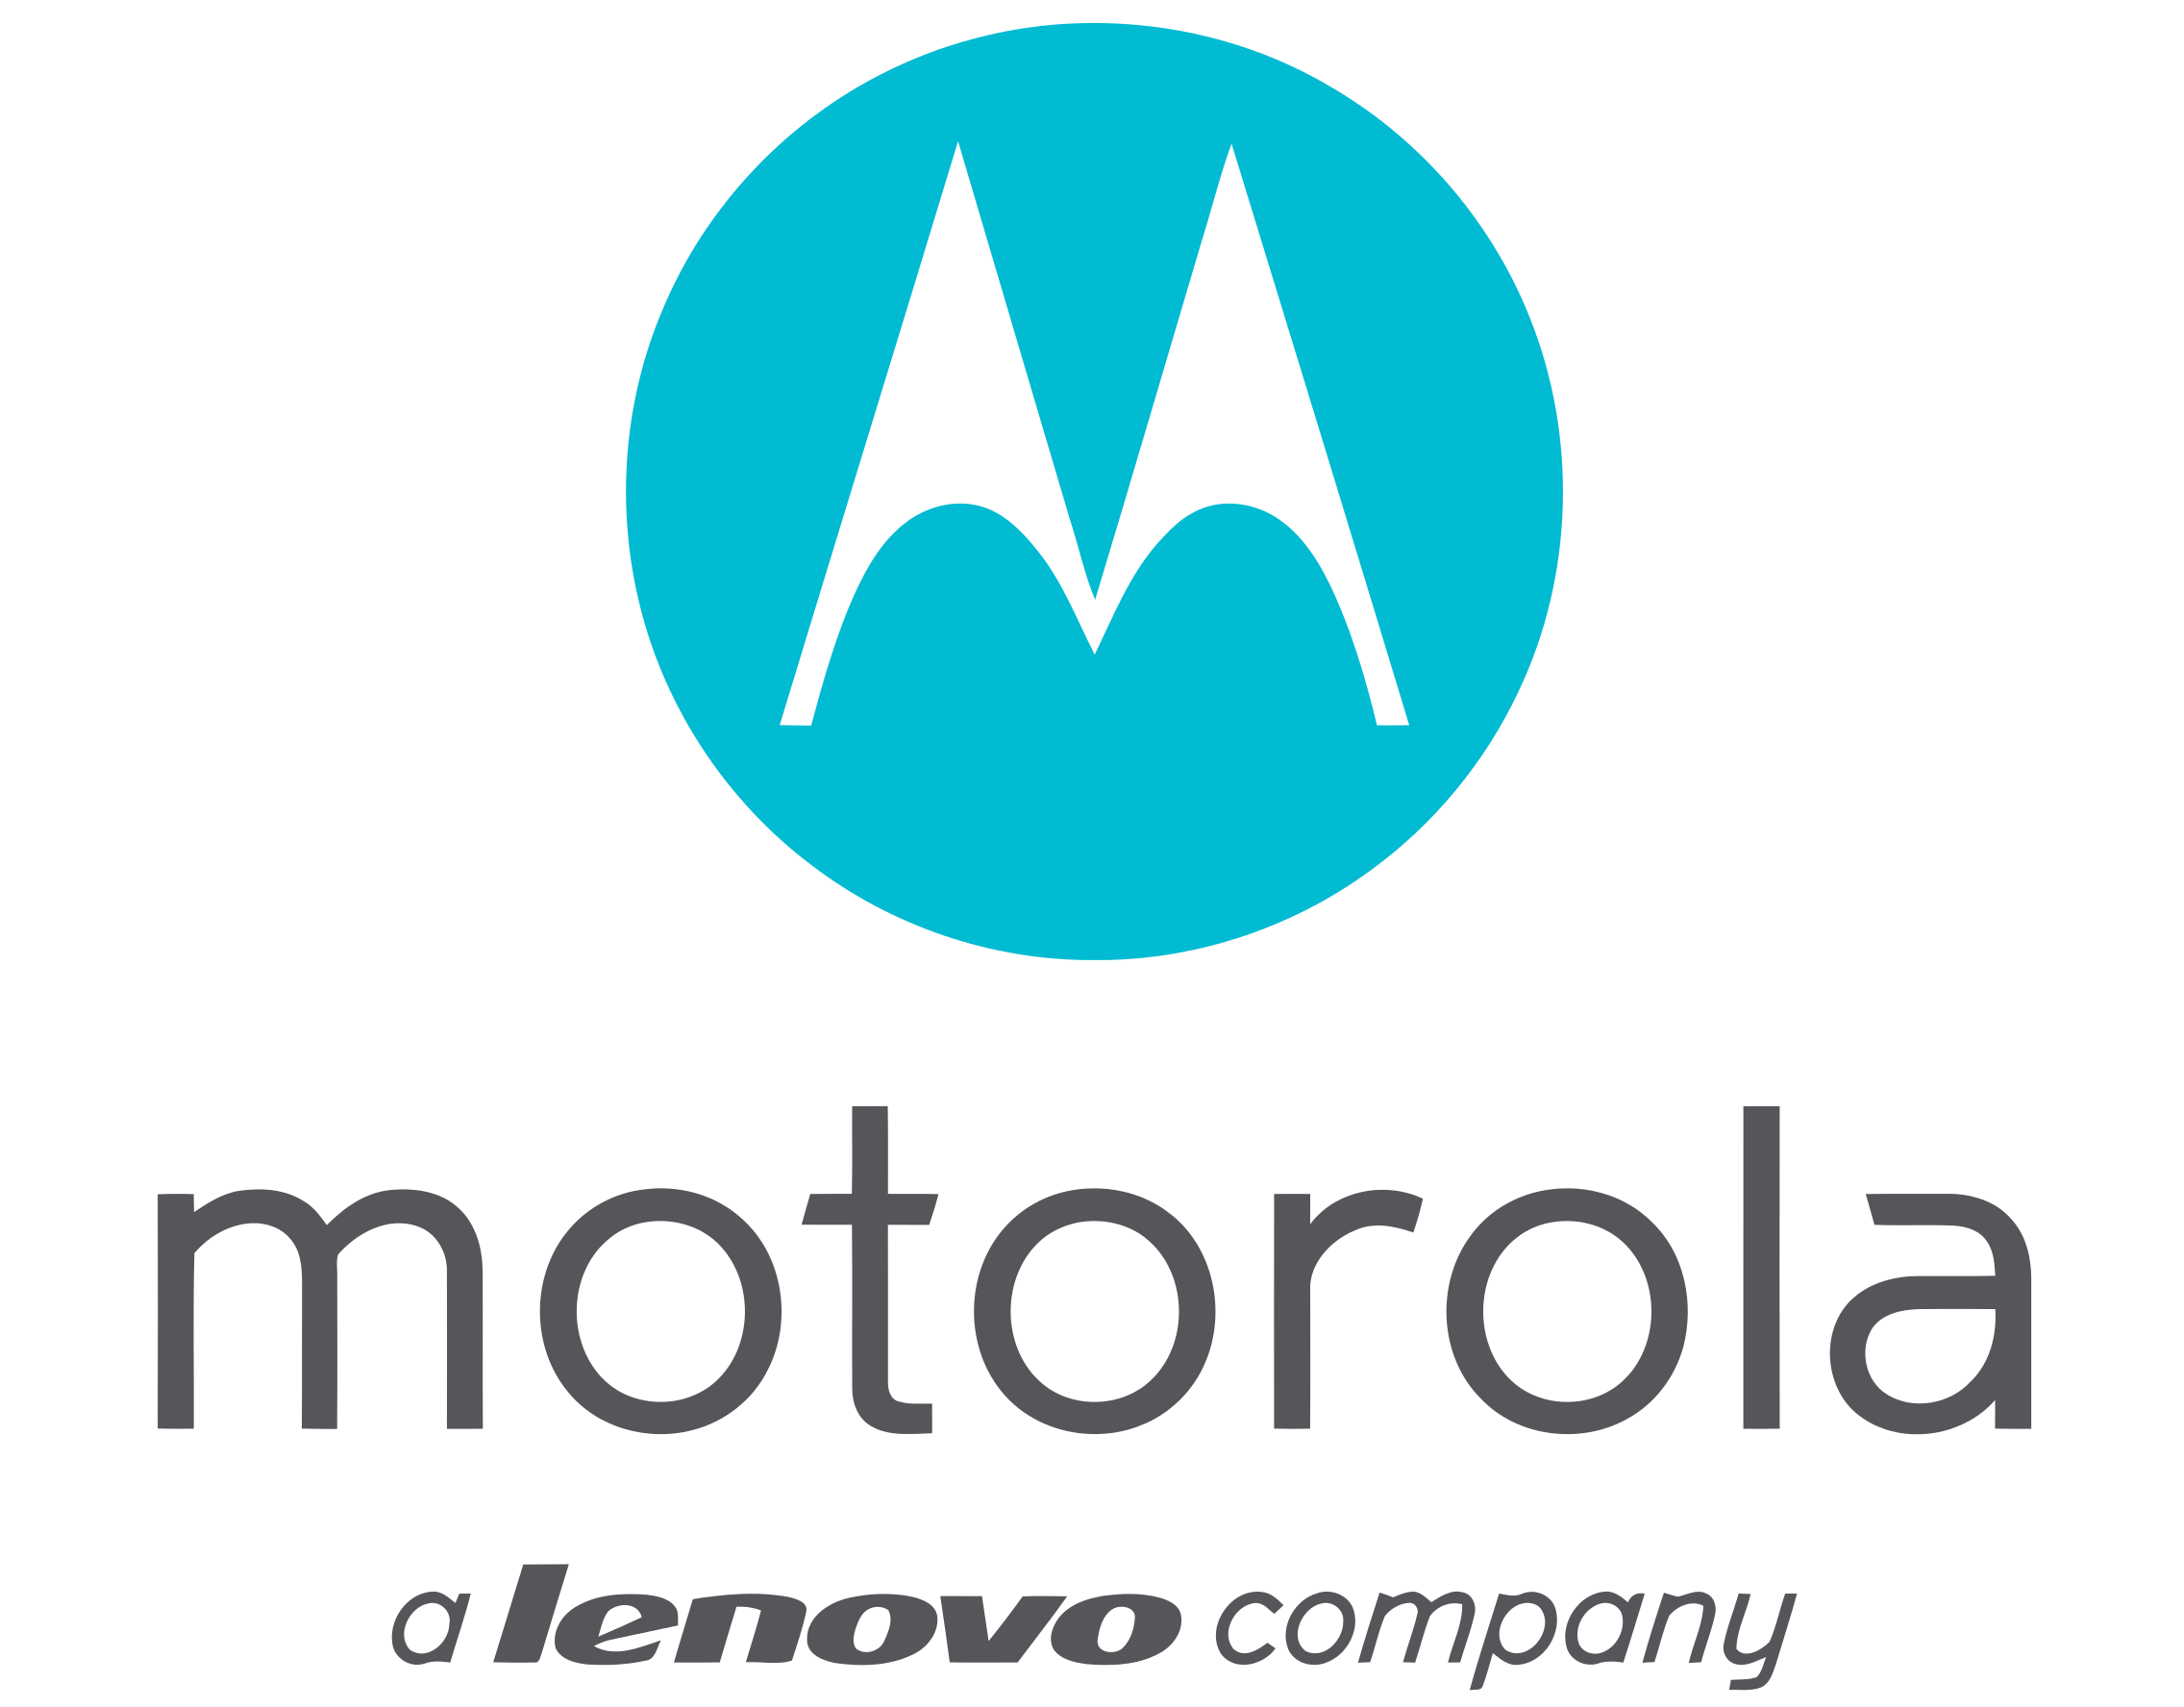 Motorola Batwing logo for video production page